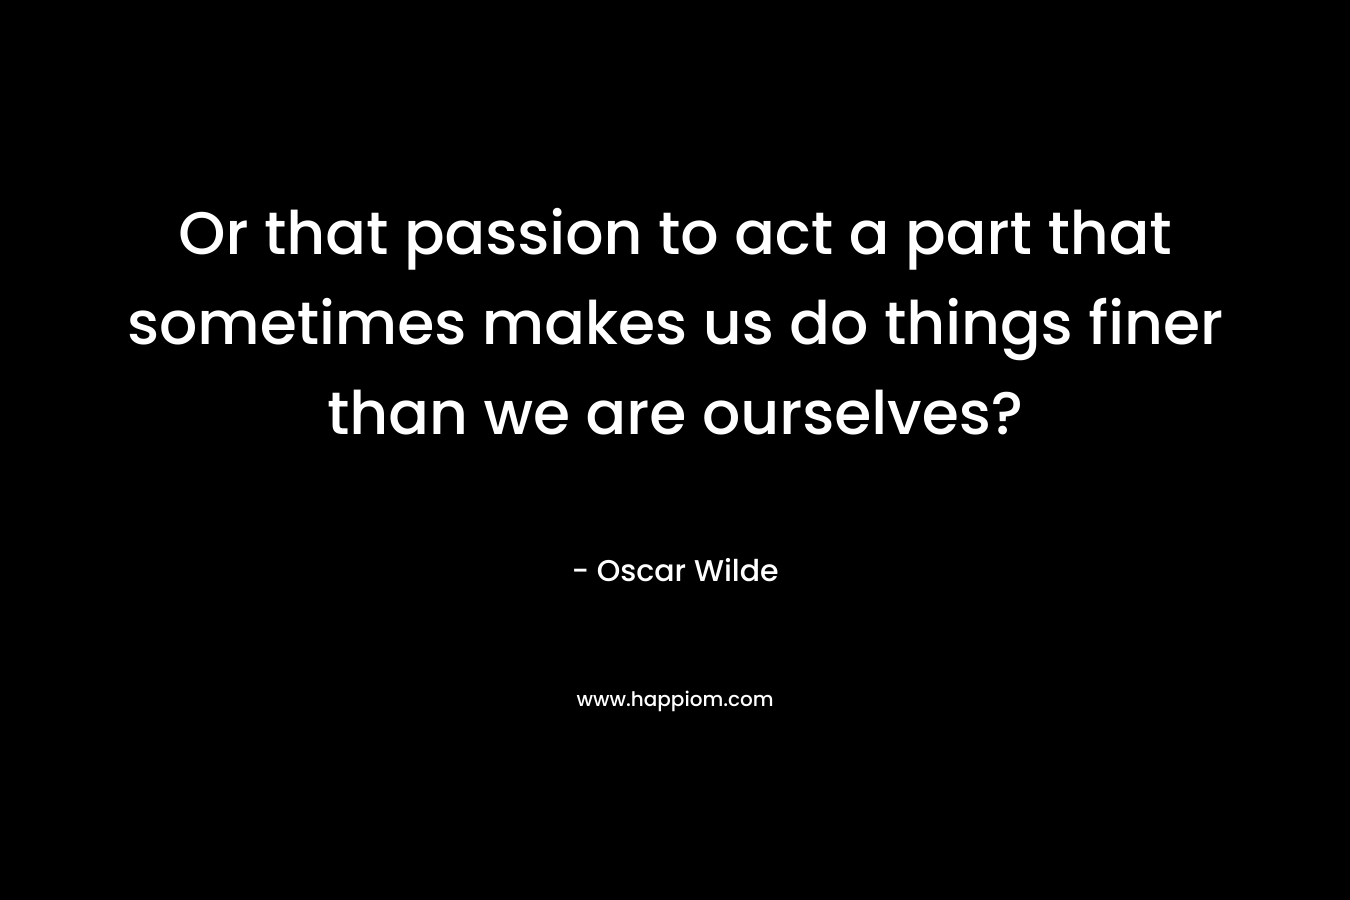 Or that passion to act a part that sometimes makes us do things finer than we are ourselves? – Oscar Wilde